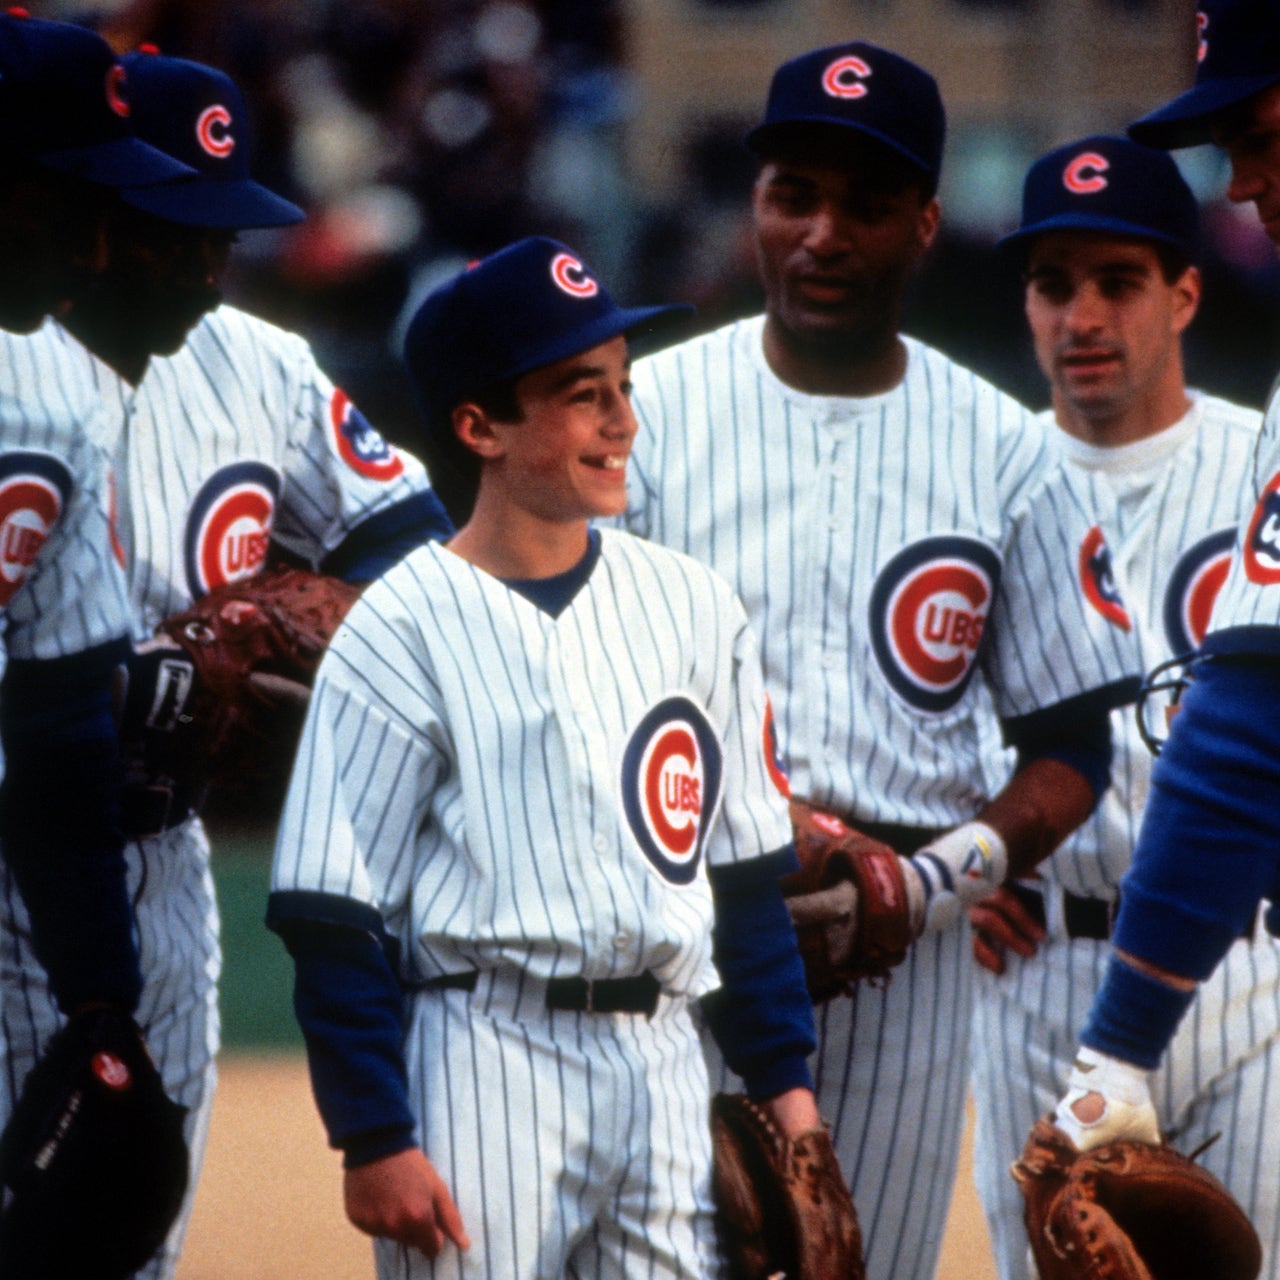 Rookie of the Year' actor sports 'Rowengartner' jersey at Cubs-Mets Game 4